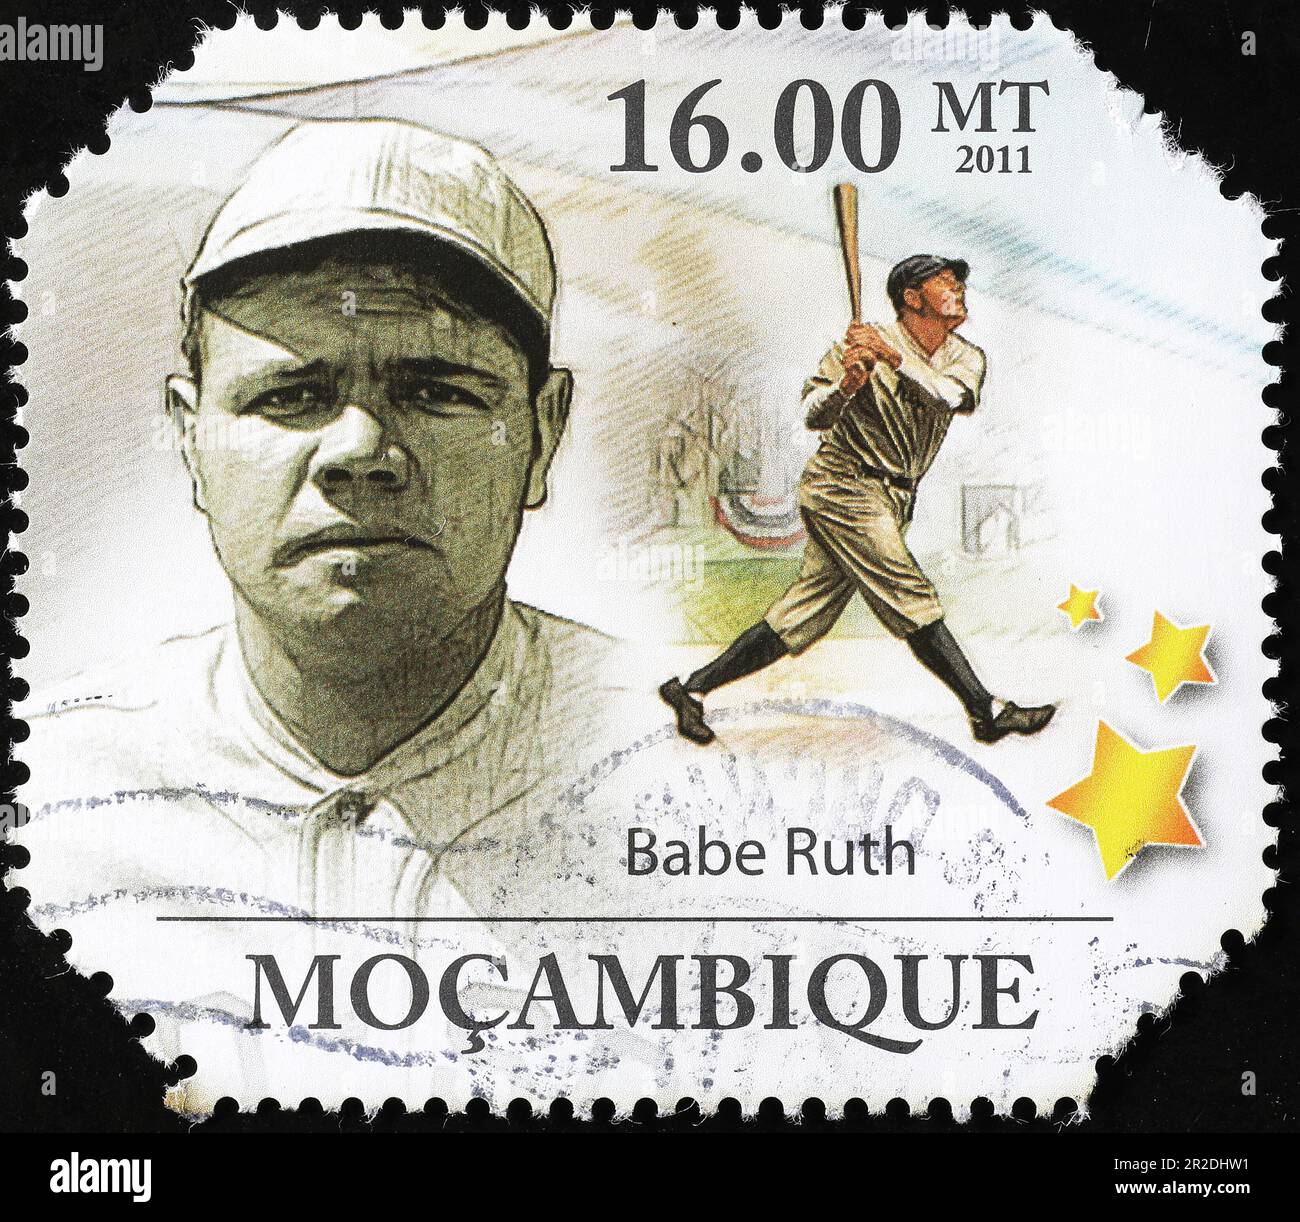 Legendary Babe Ruth on postage stamp Stock Photo